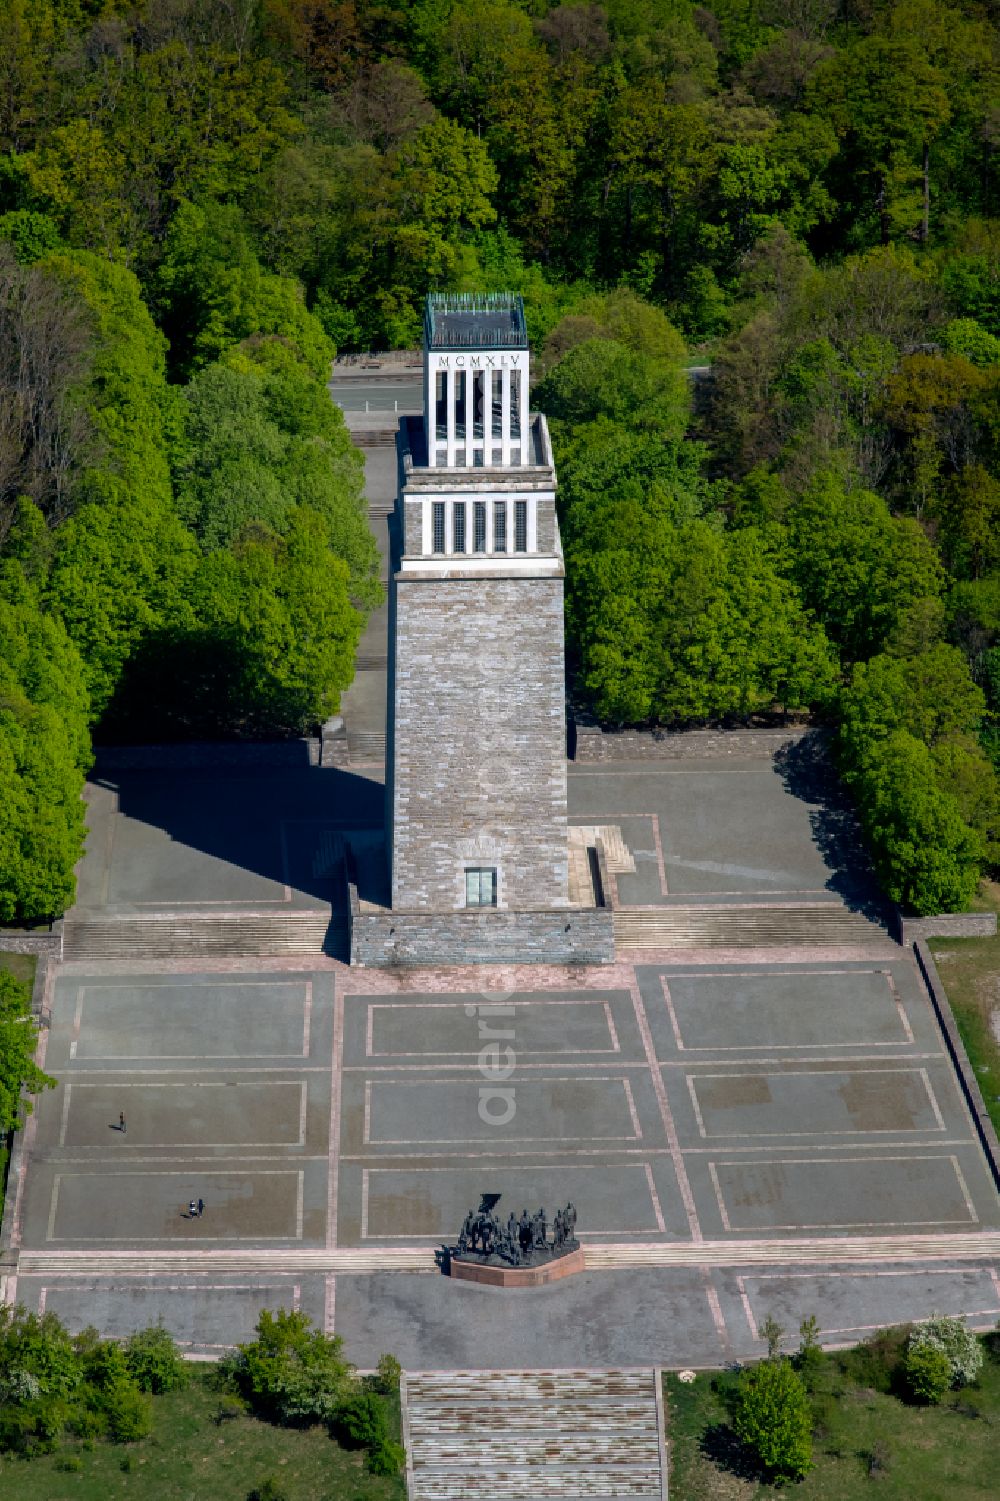 Aerial photograph Weimar - Tourist attraction of the historic monument Nationale Mahn- and Gedenkstaette of DDR Buchenwald in the district Ettersberg in Weimar in the state Thuringia, Germany